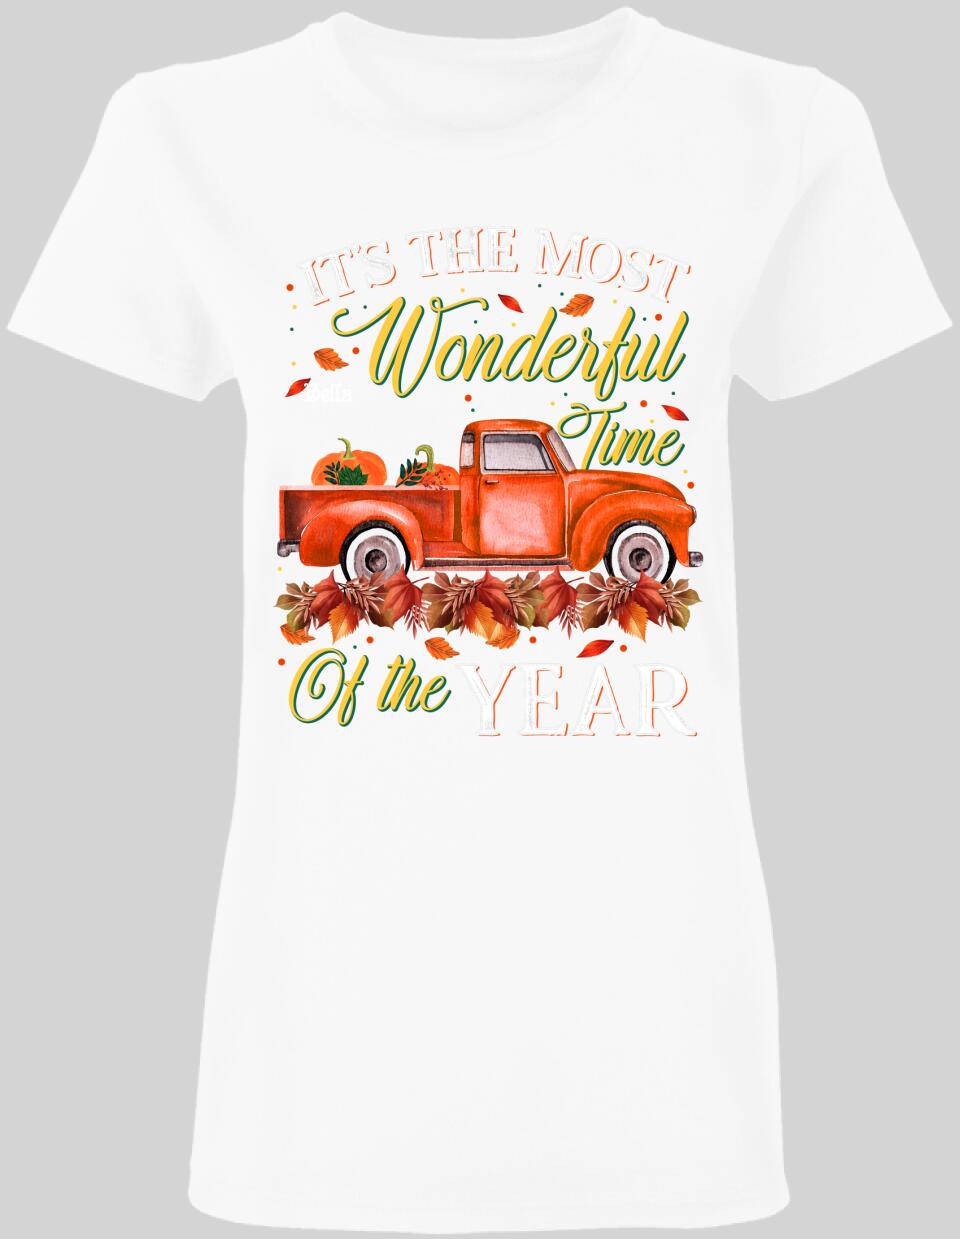 It's The Most Wonderful Time - Personalized T-shirt